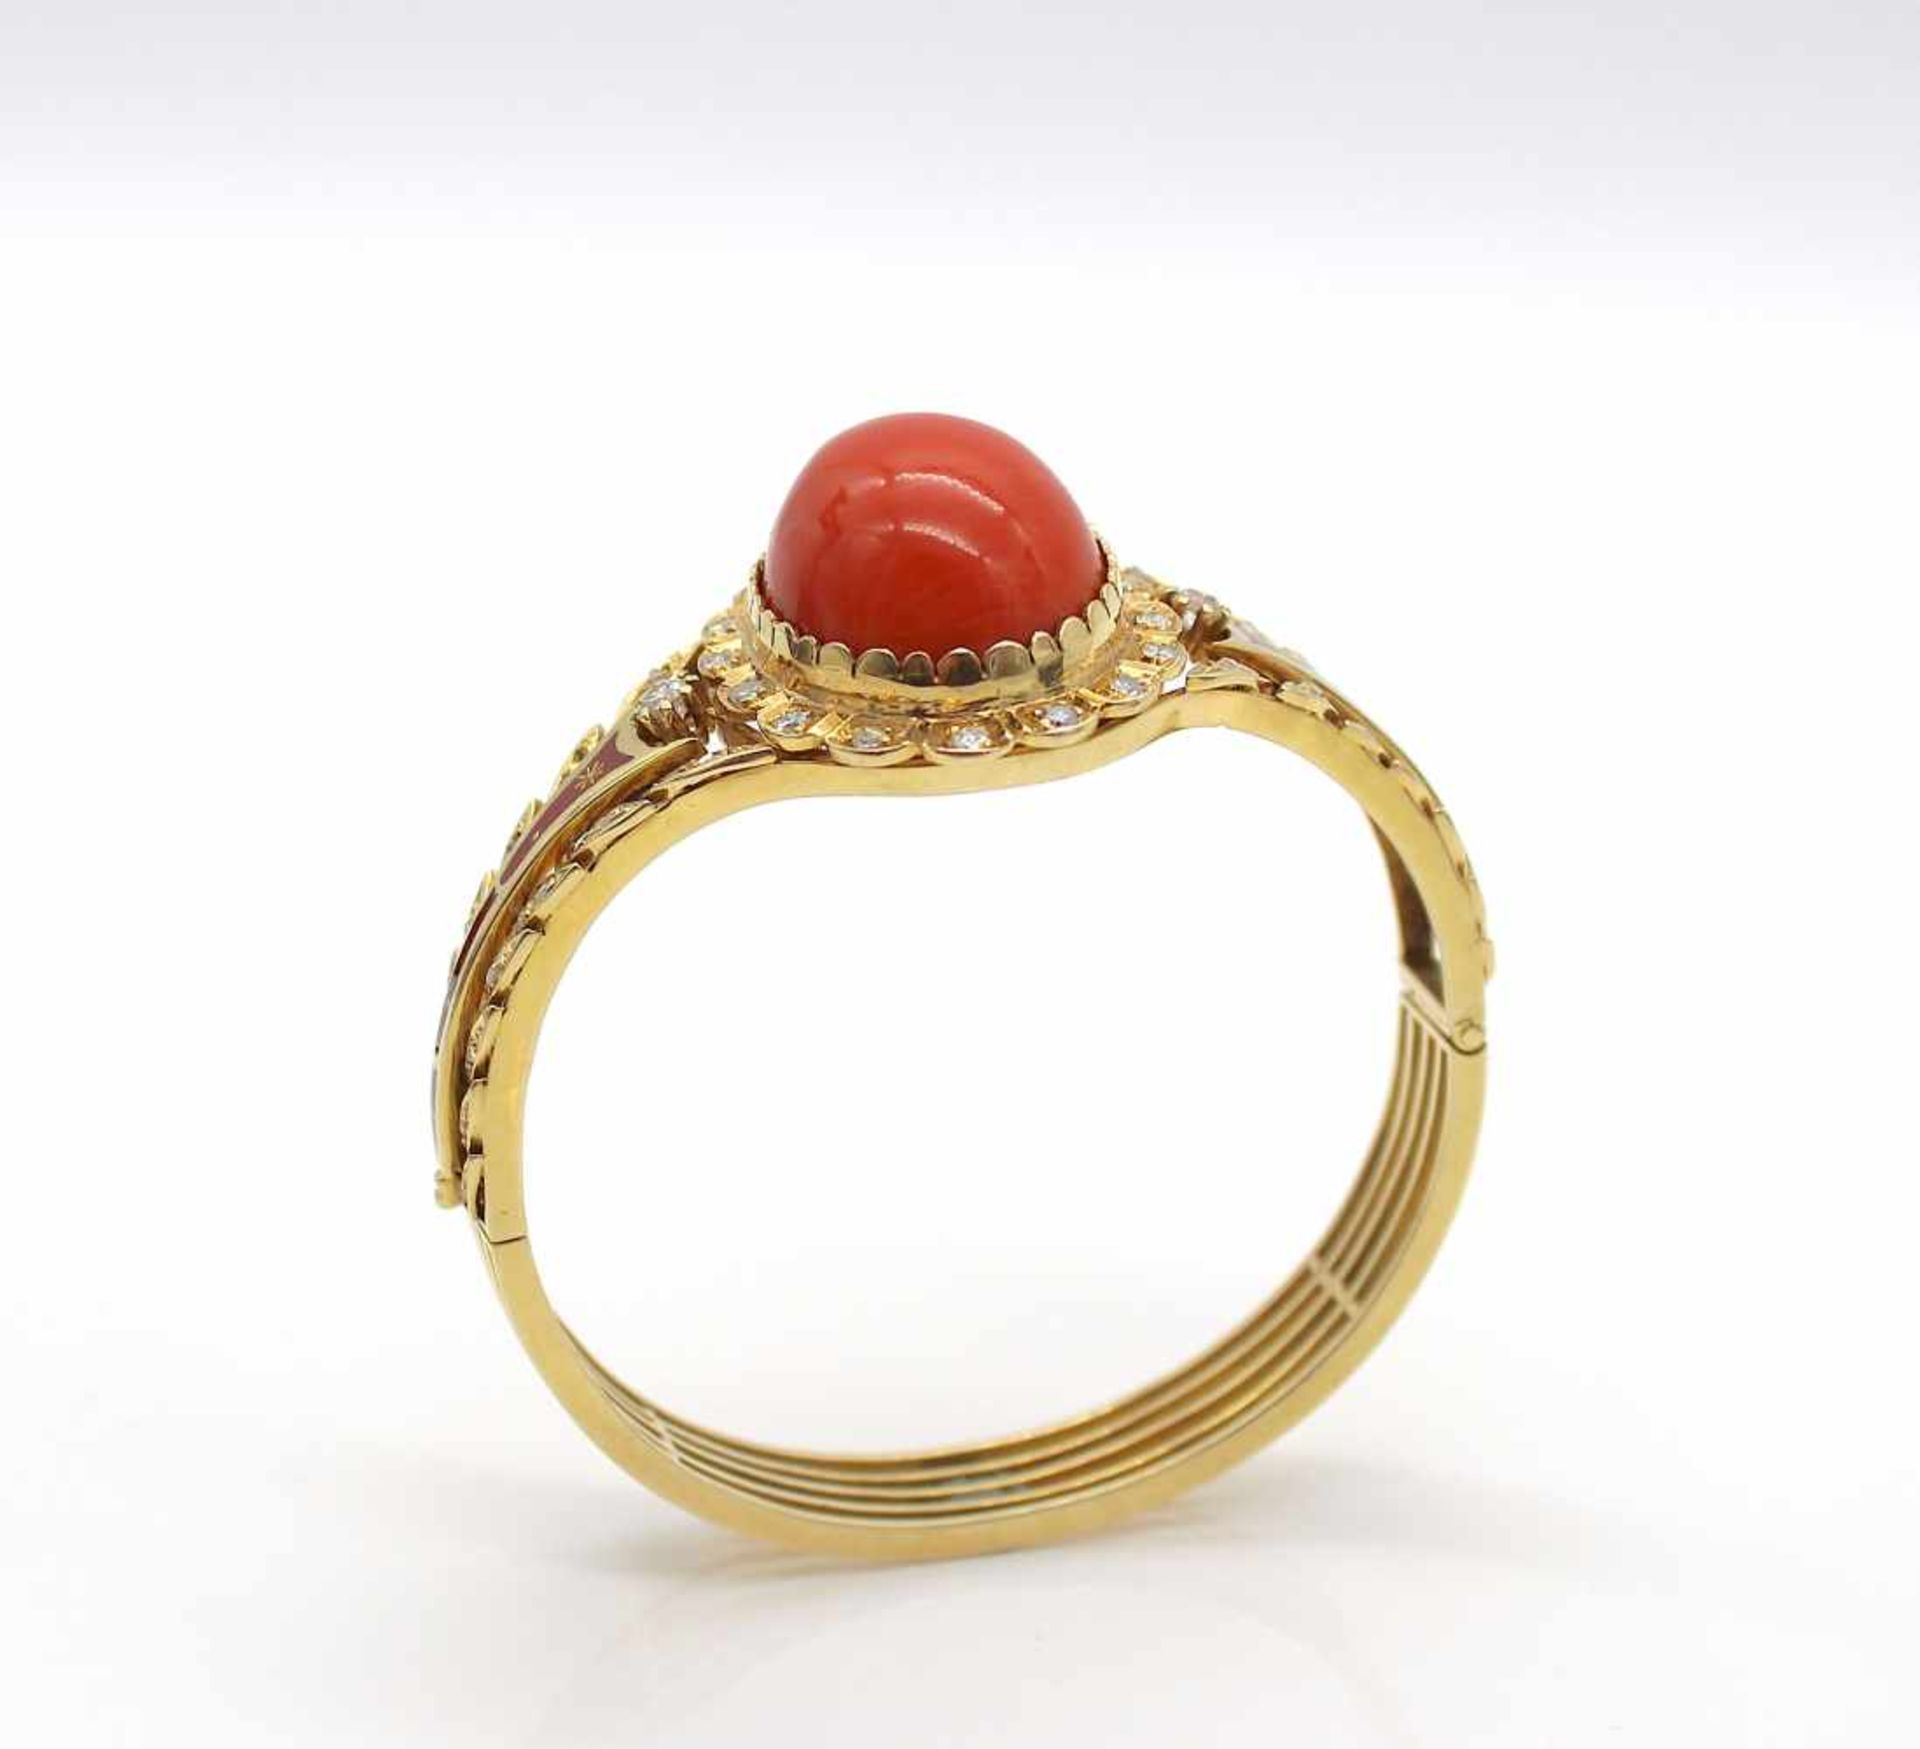 Bracelet made of 585 gold with an oval, orange-red coral approx. 47 ct, 58 diamonds partly old cut - Bild 4 aus 4